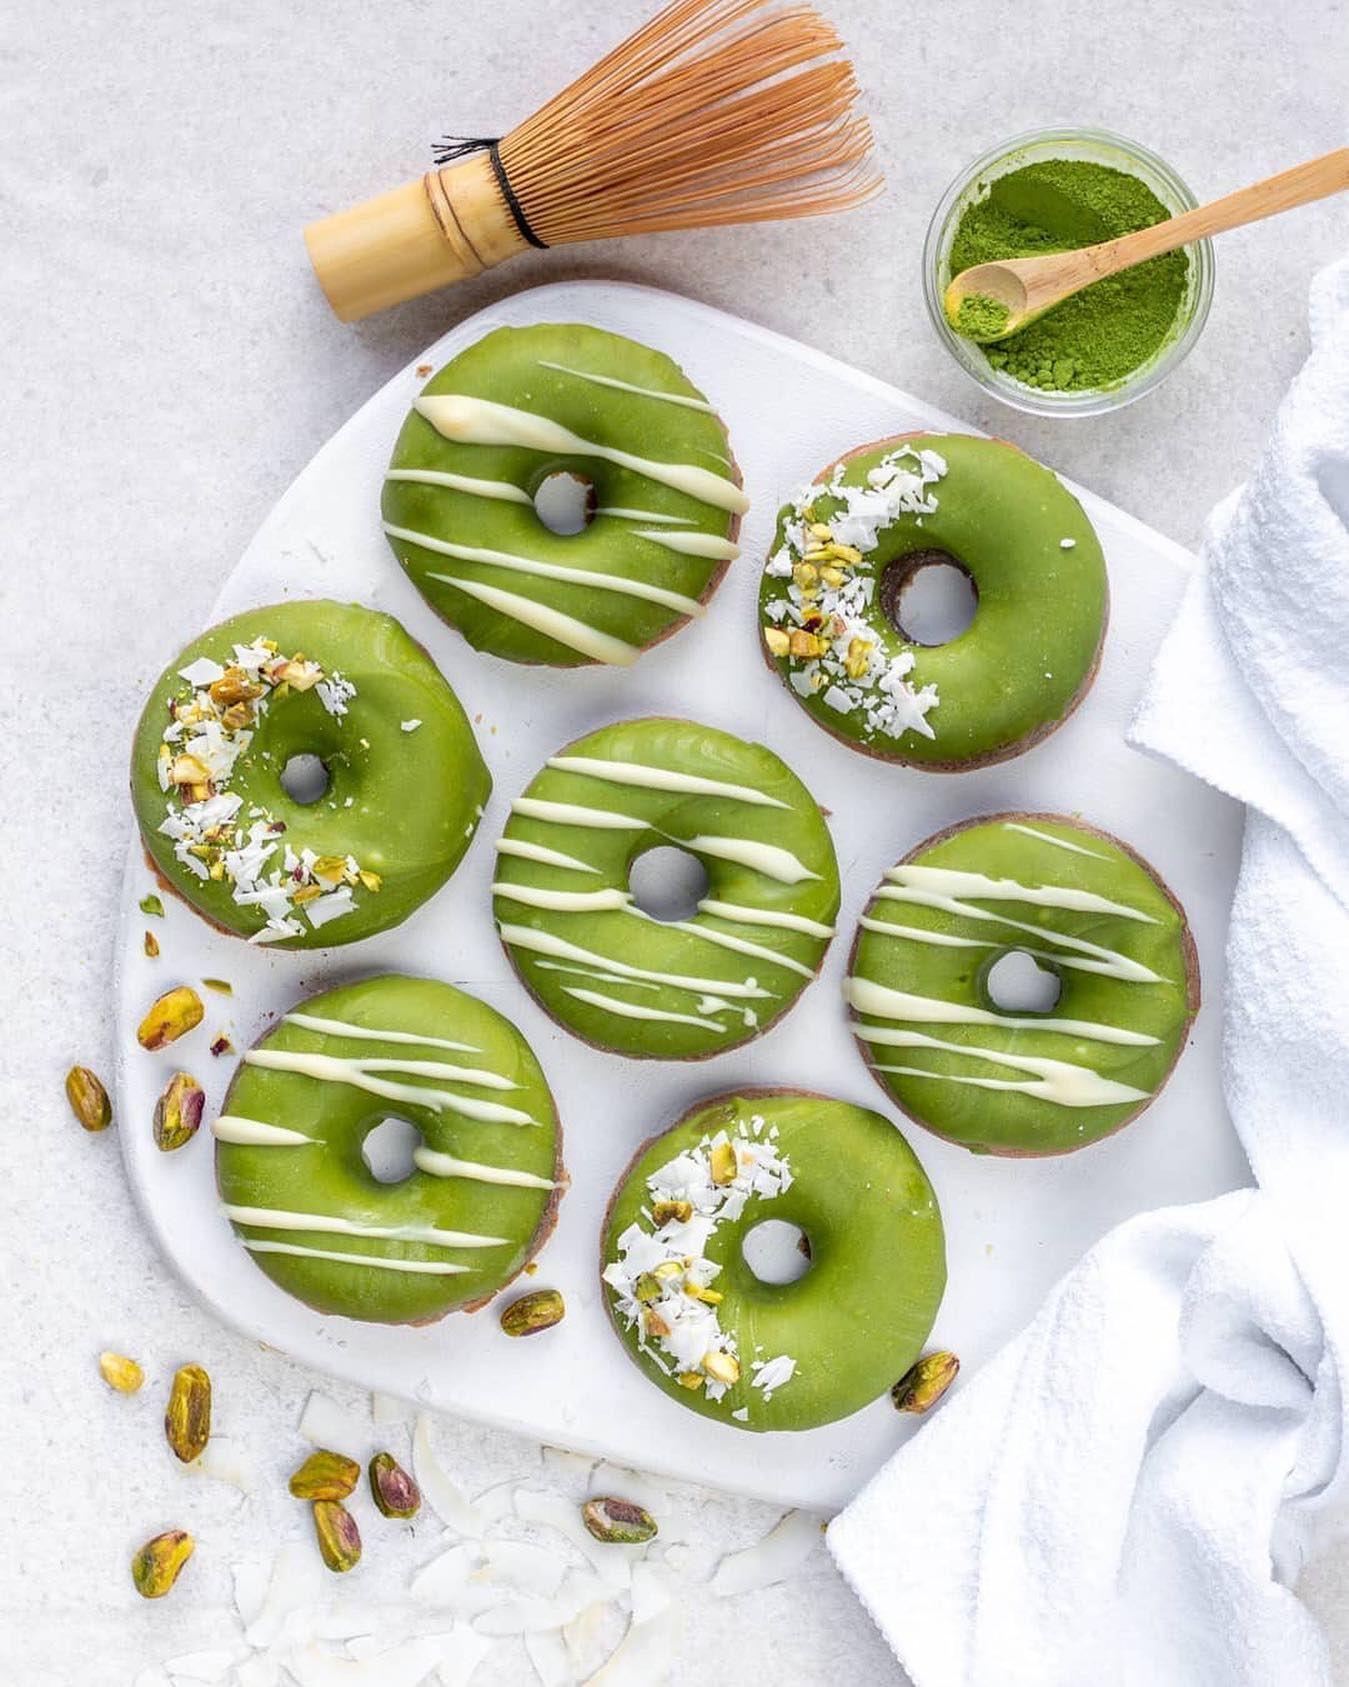 Check out this vegan matcha donut?🍩🍵 Made by @alchemy.eats | Matcha recipe, Delicious donuts, Asian desserts